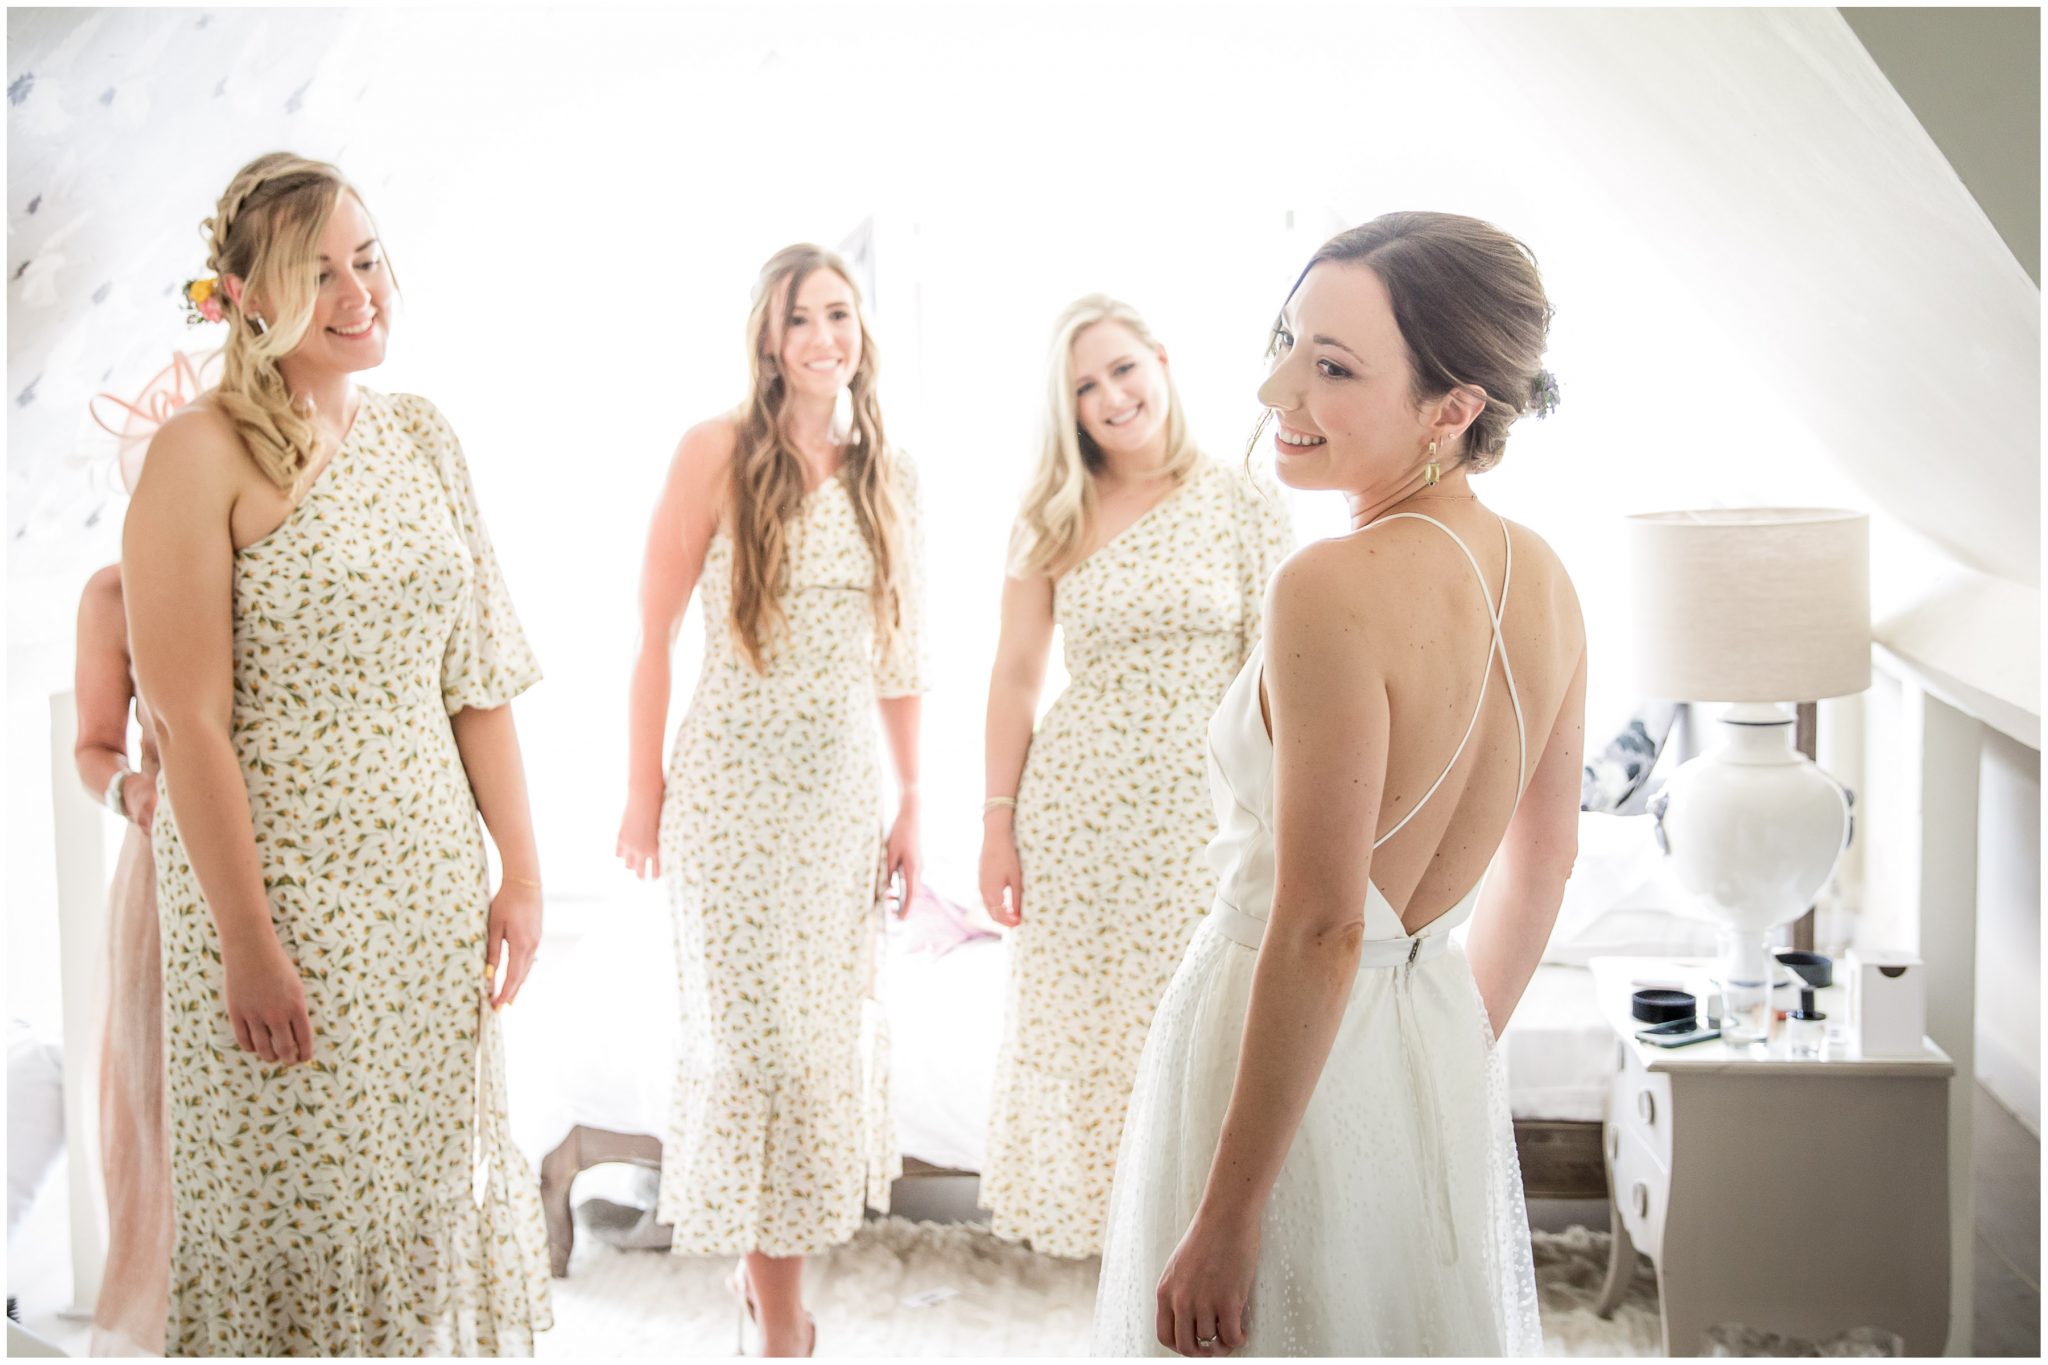 Bridesmaids watch and smile as bride tries on her wedding dress